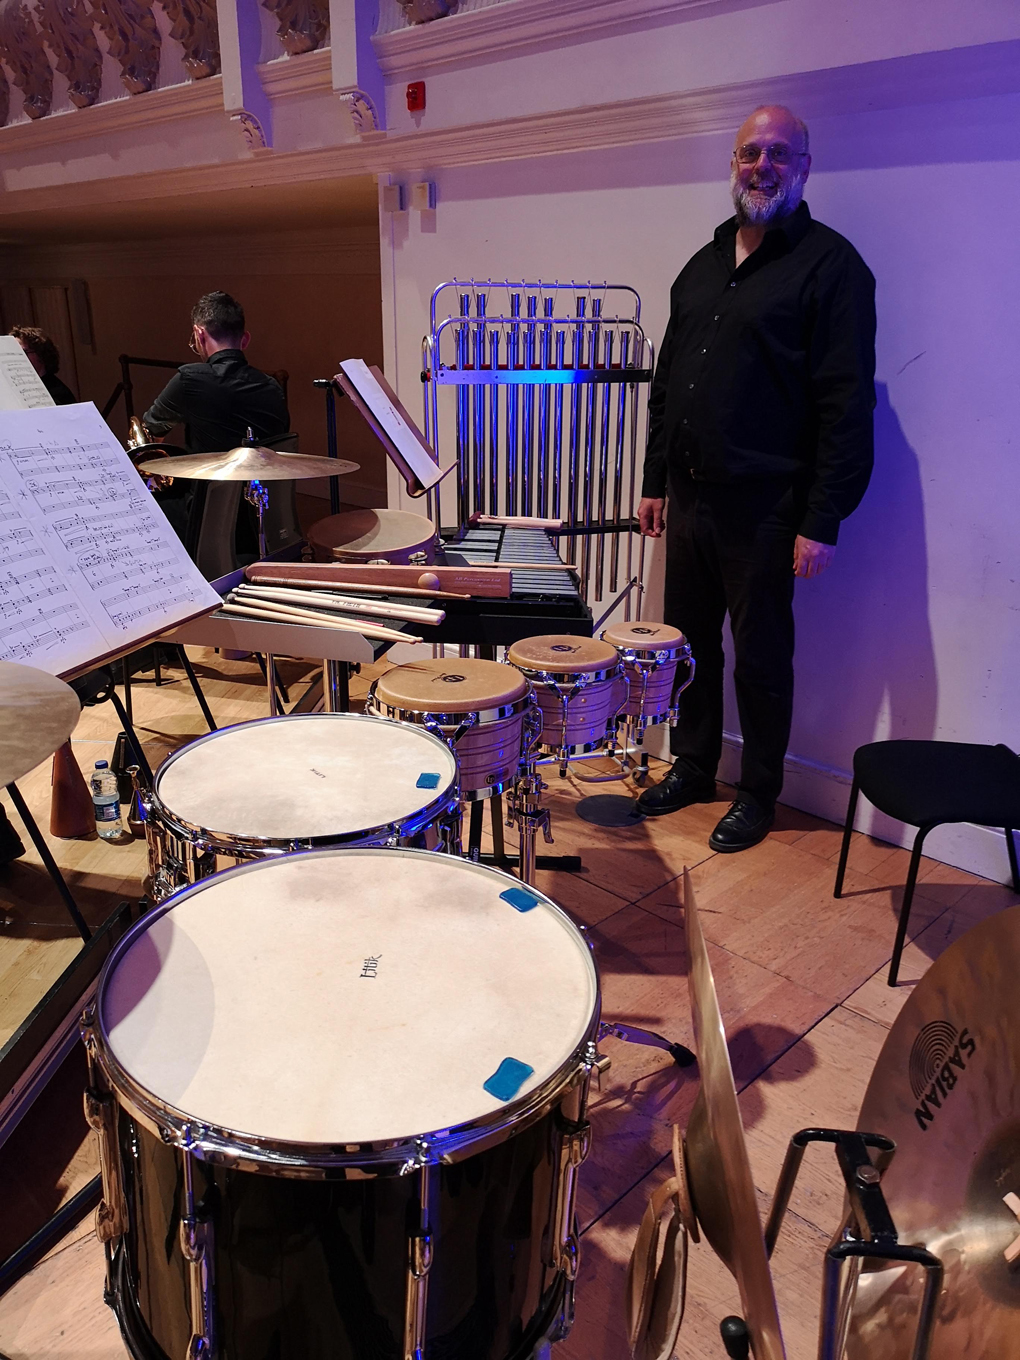 Percussion instruments with small set of tubular bells